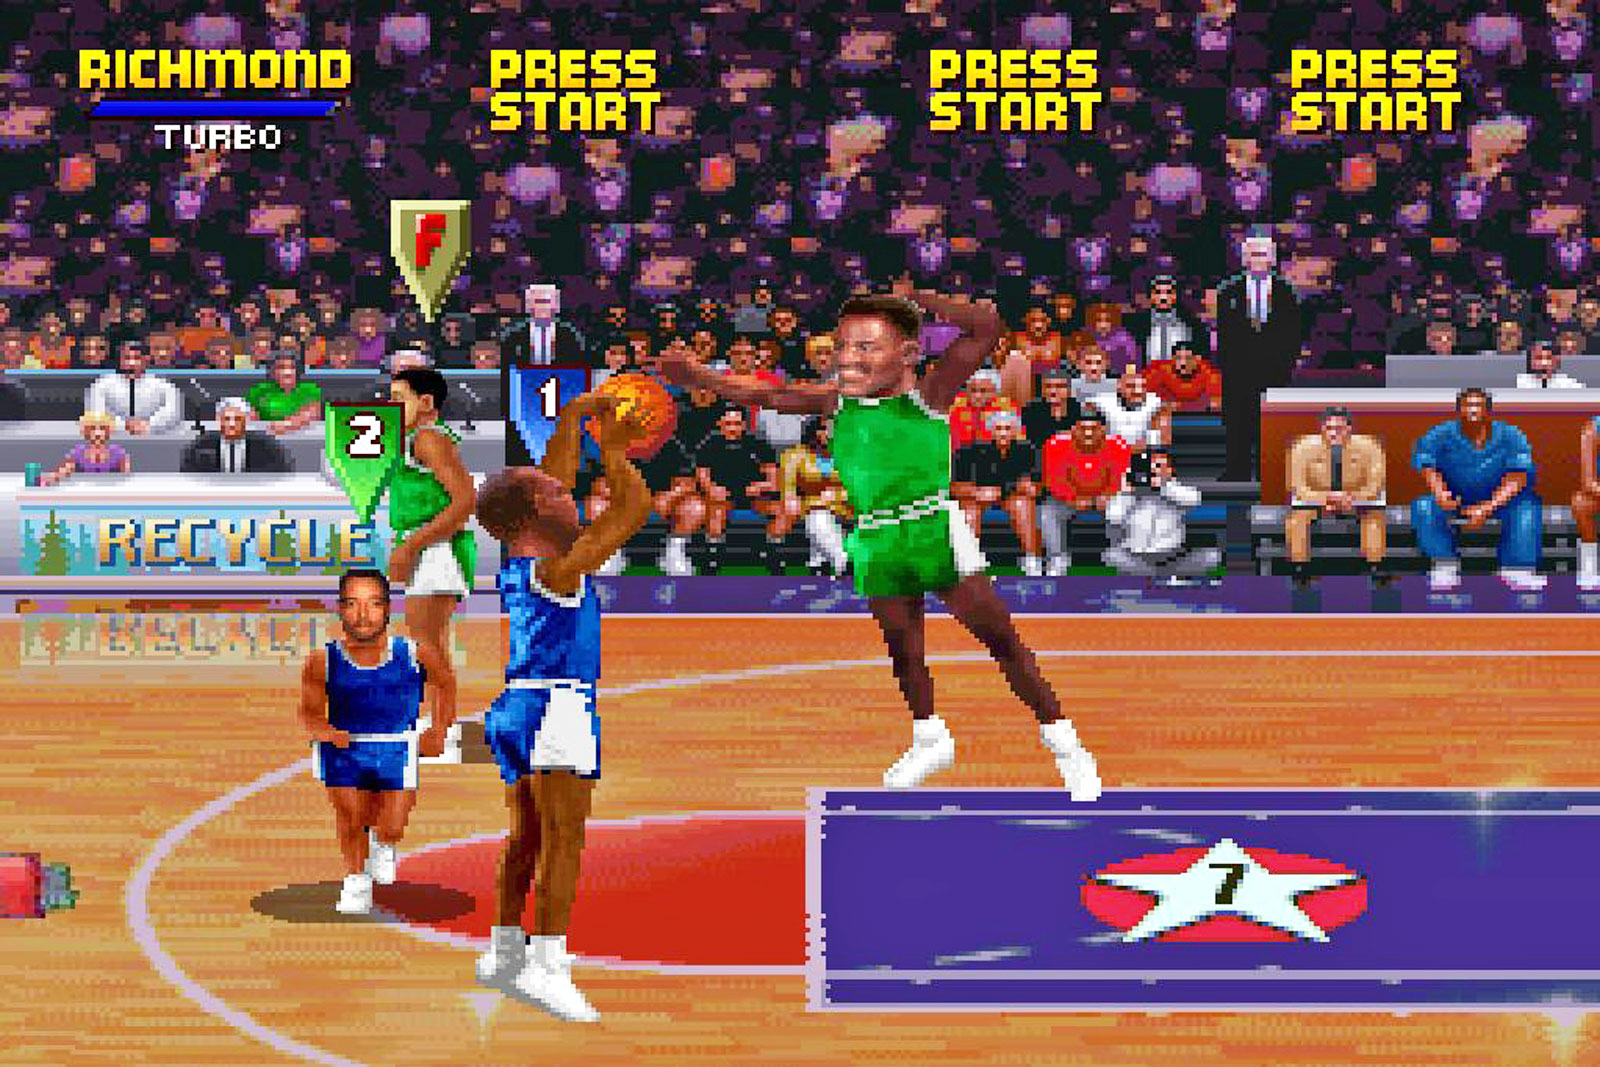 These are the Top 5 NBA Video Games